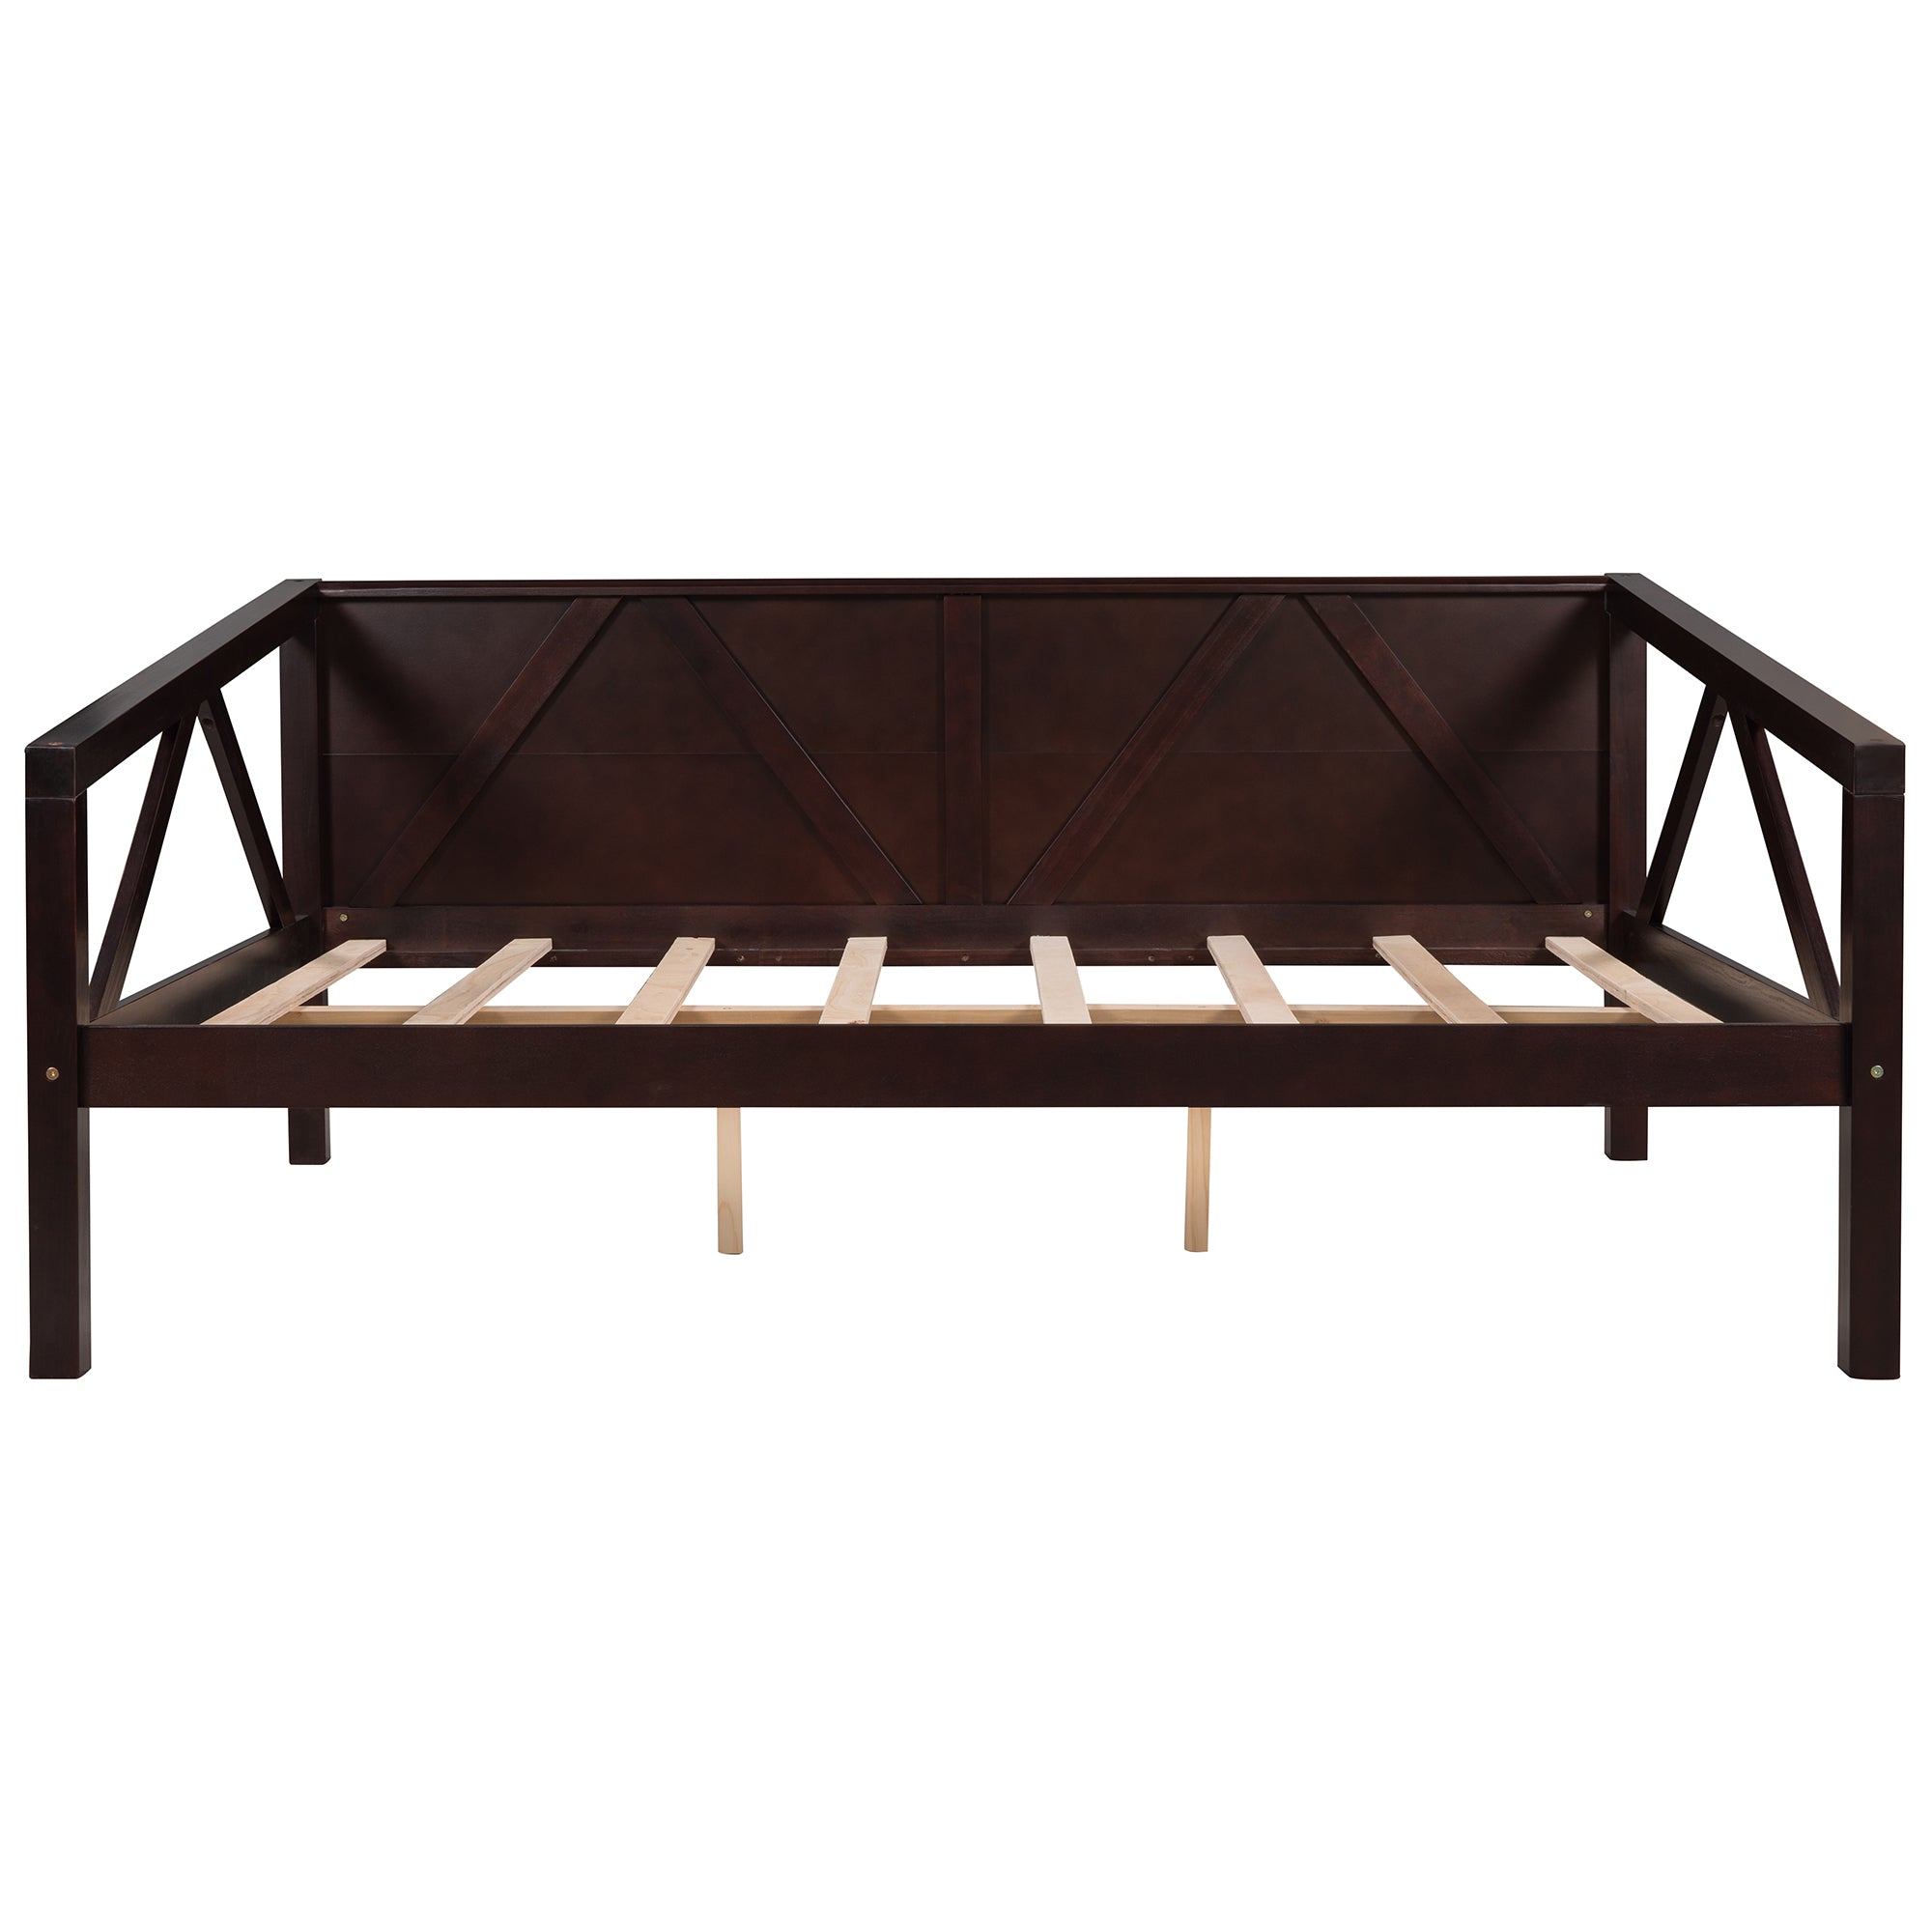 Full size Daybed, Wood Slat Support, Espresso espresso-solid wood